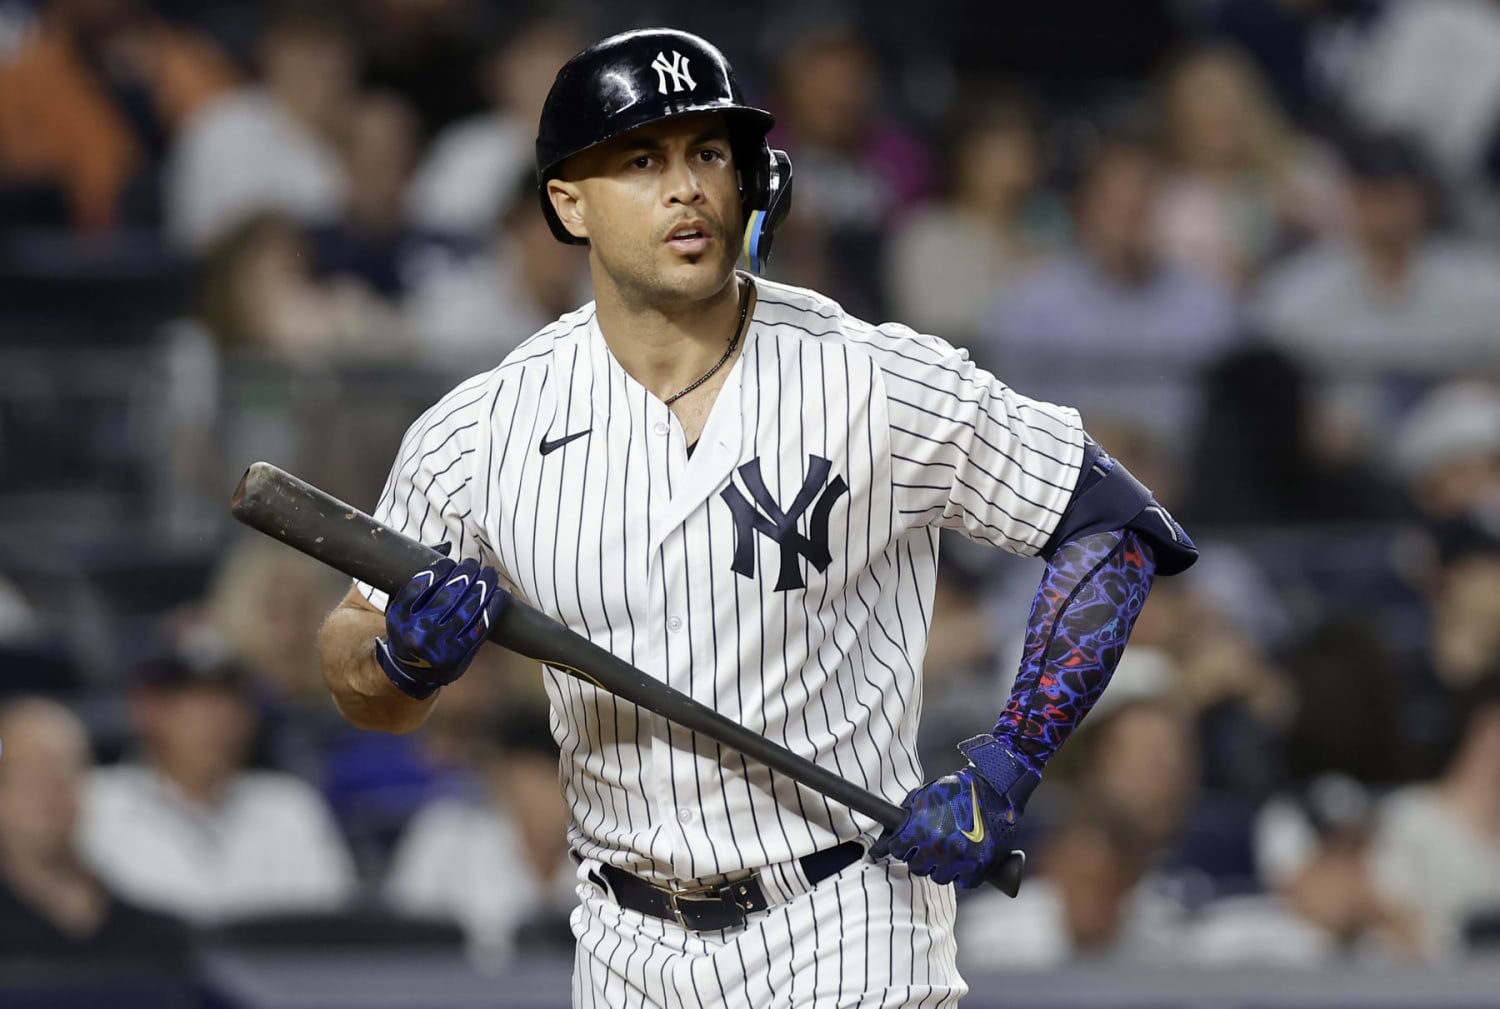 Yankees' Giancarlo Stanton snaps out of slump with monster homer